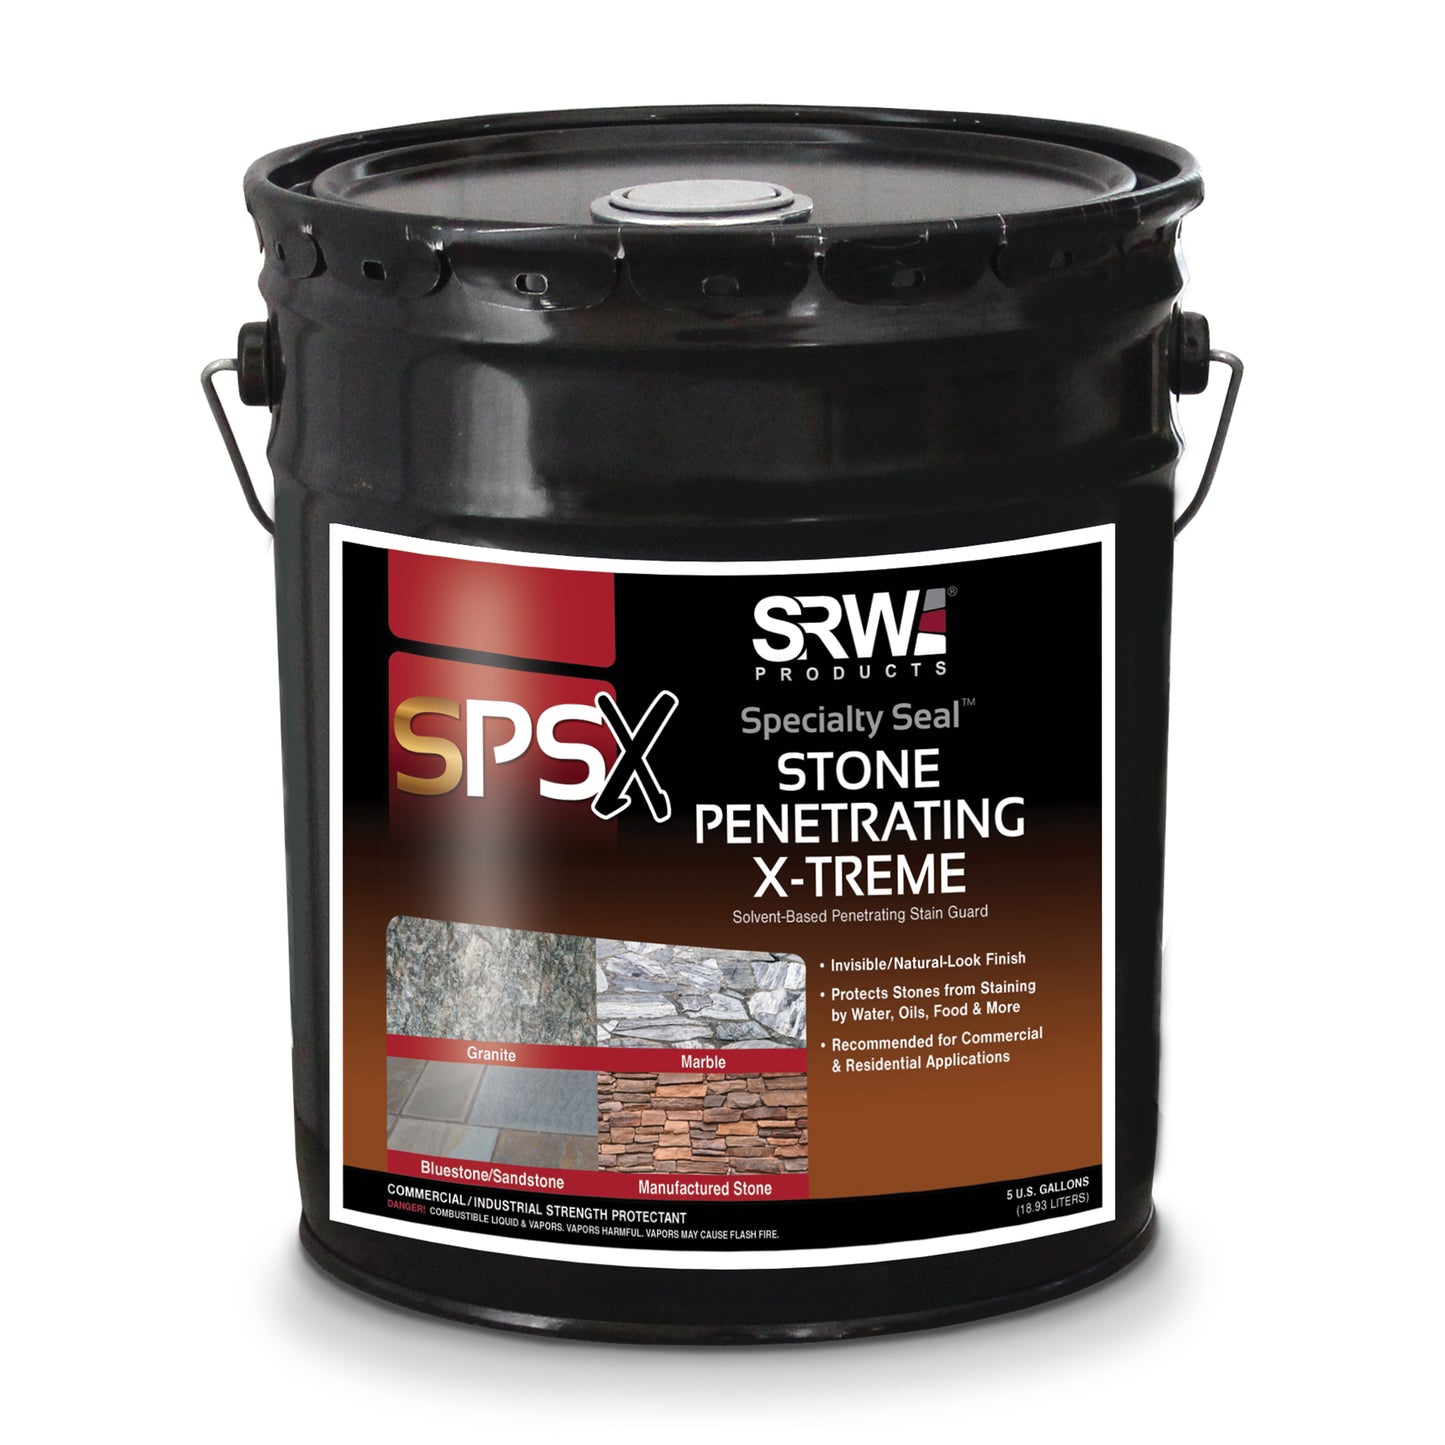 SRW Products S-PSX Stone Penetrating X-treme - Specialty Seal™ bucket